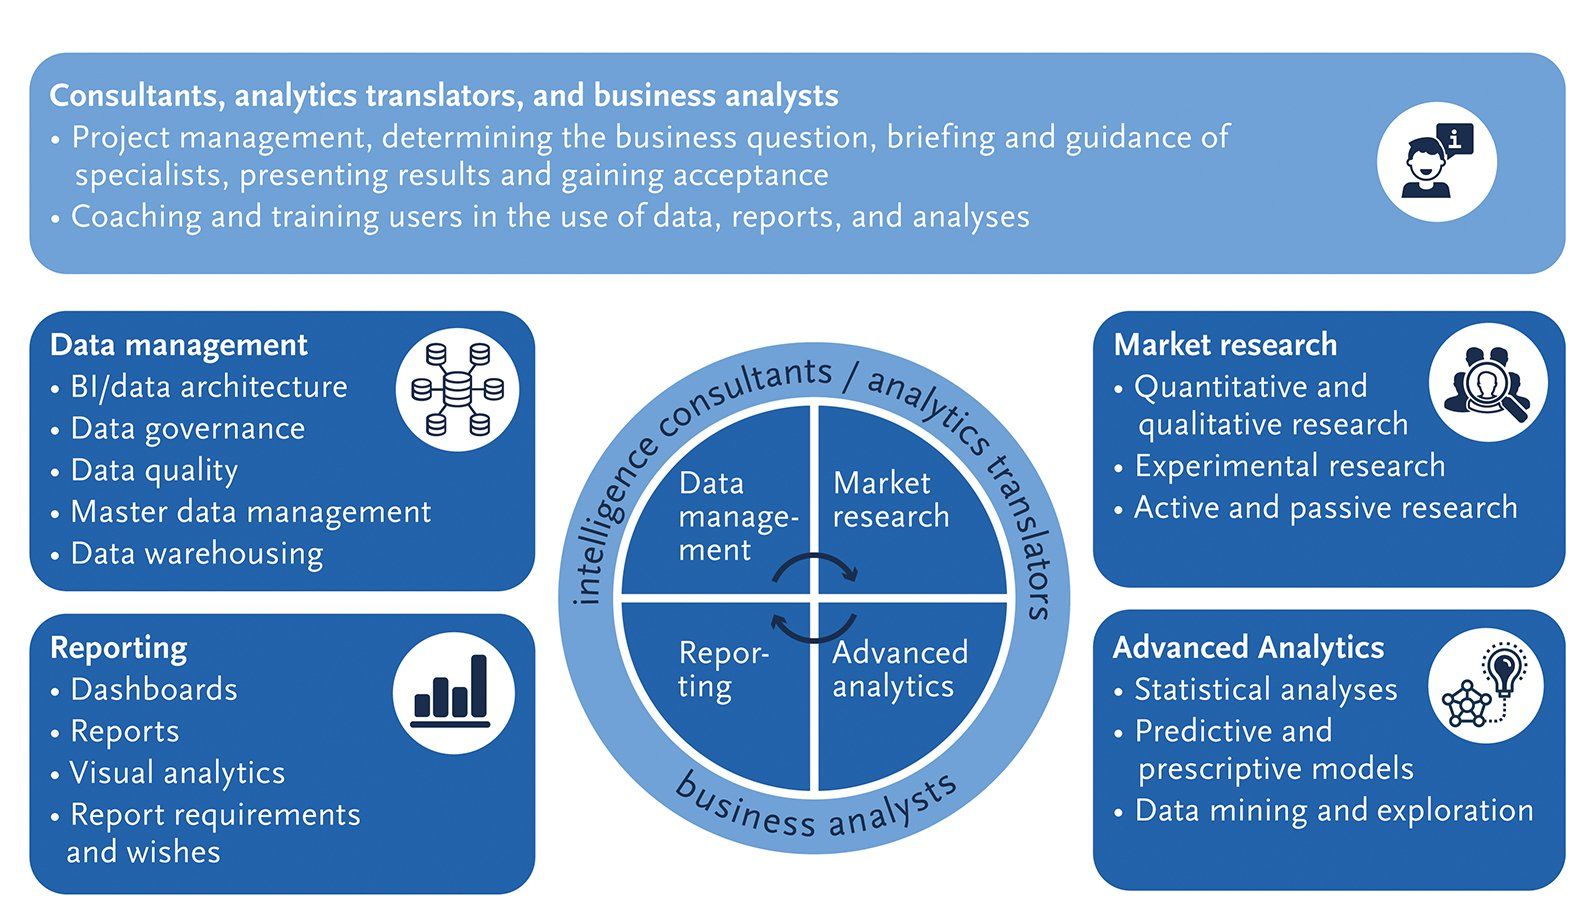 Analytics function divided into areas of expertise